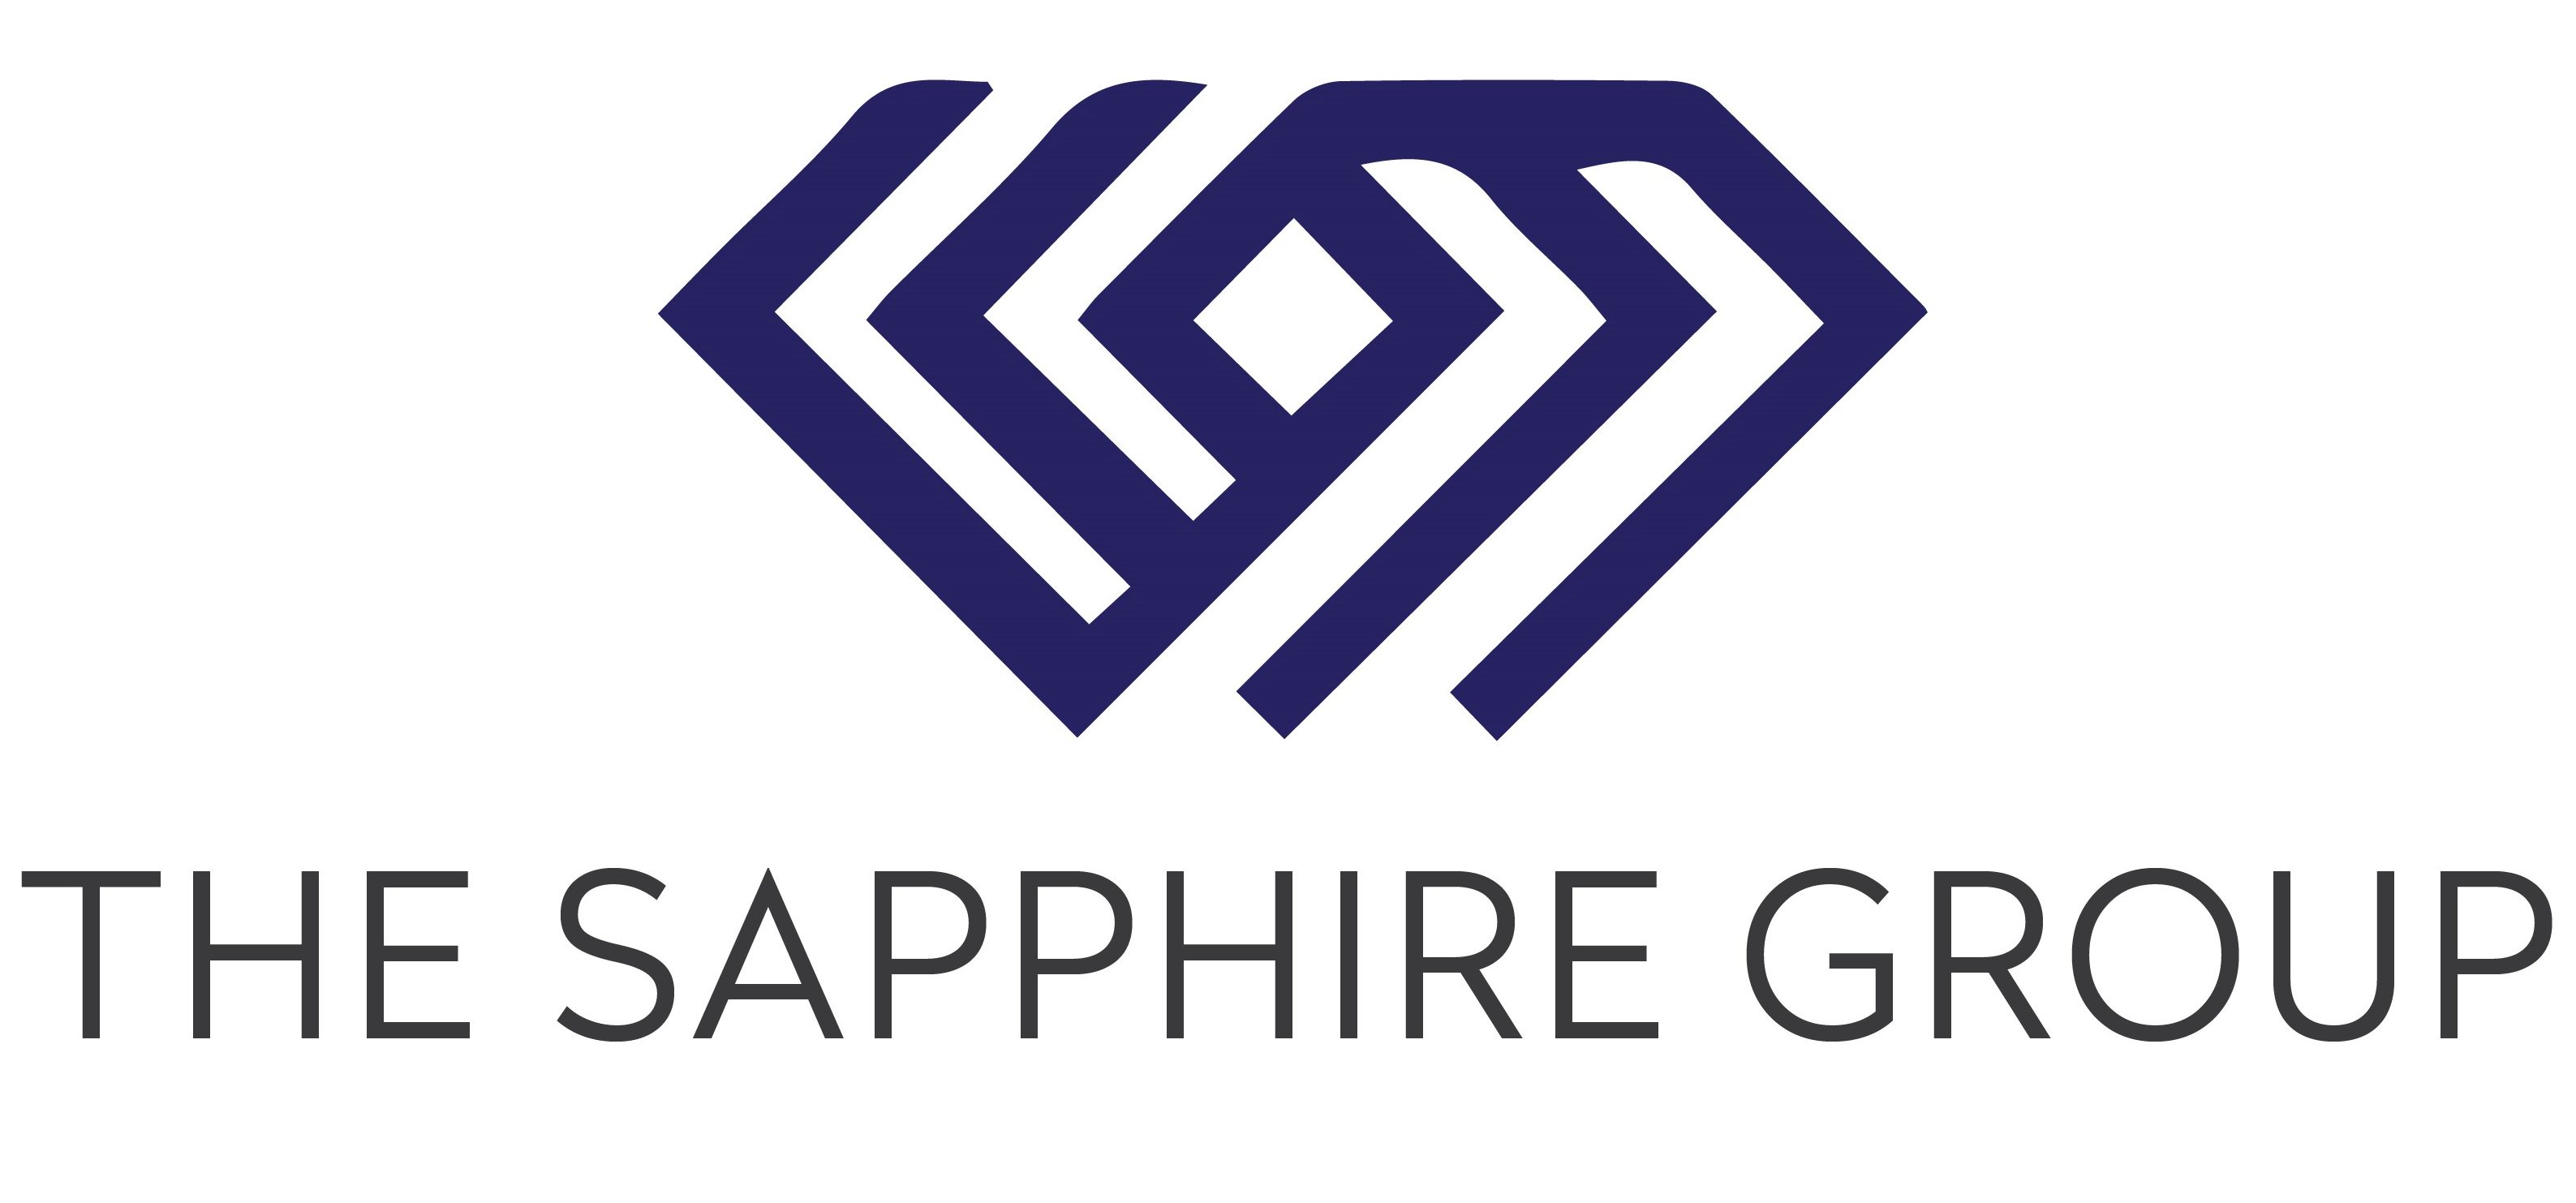 The Sapphire Group Inc.